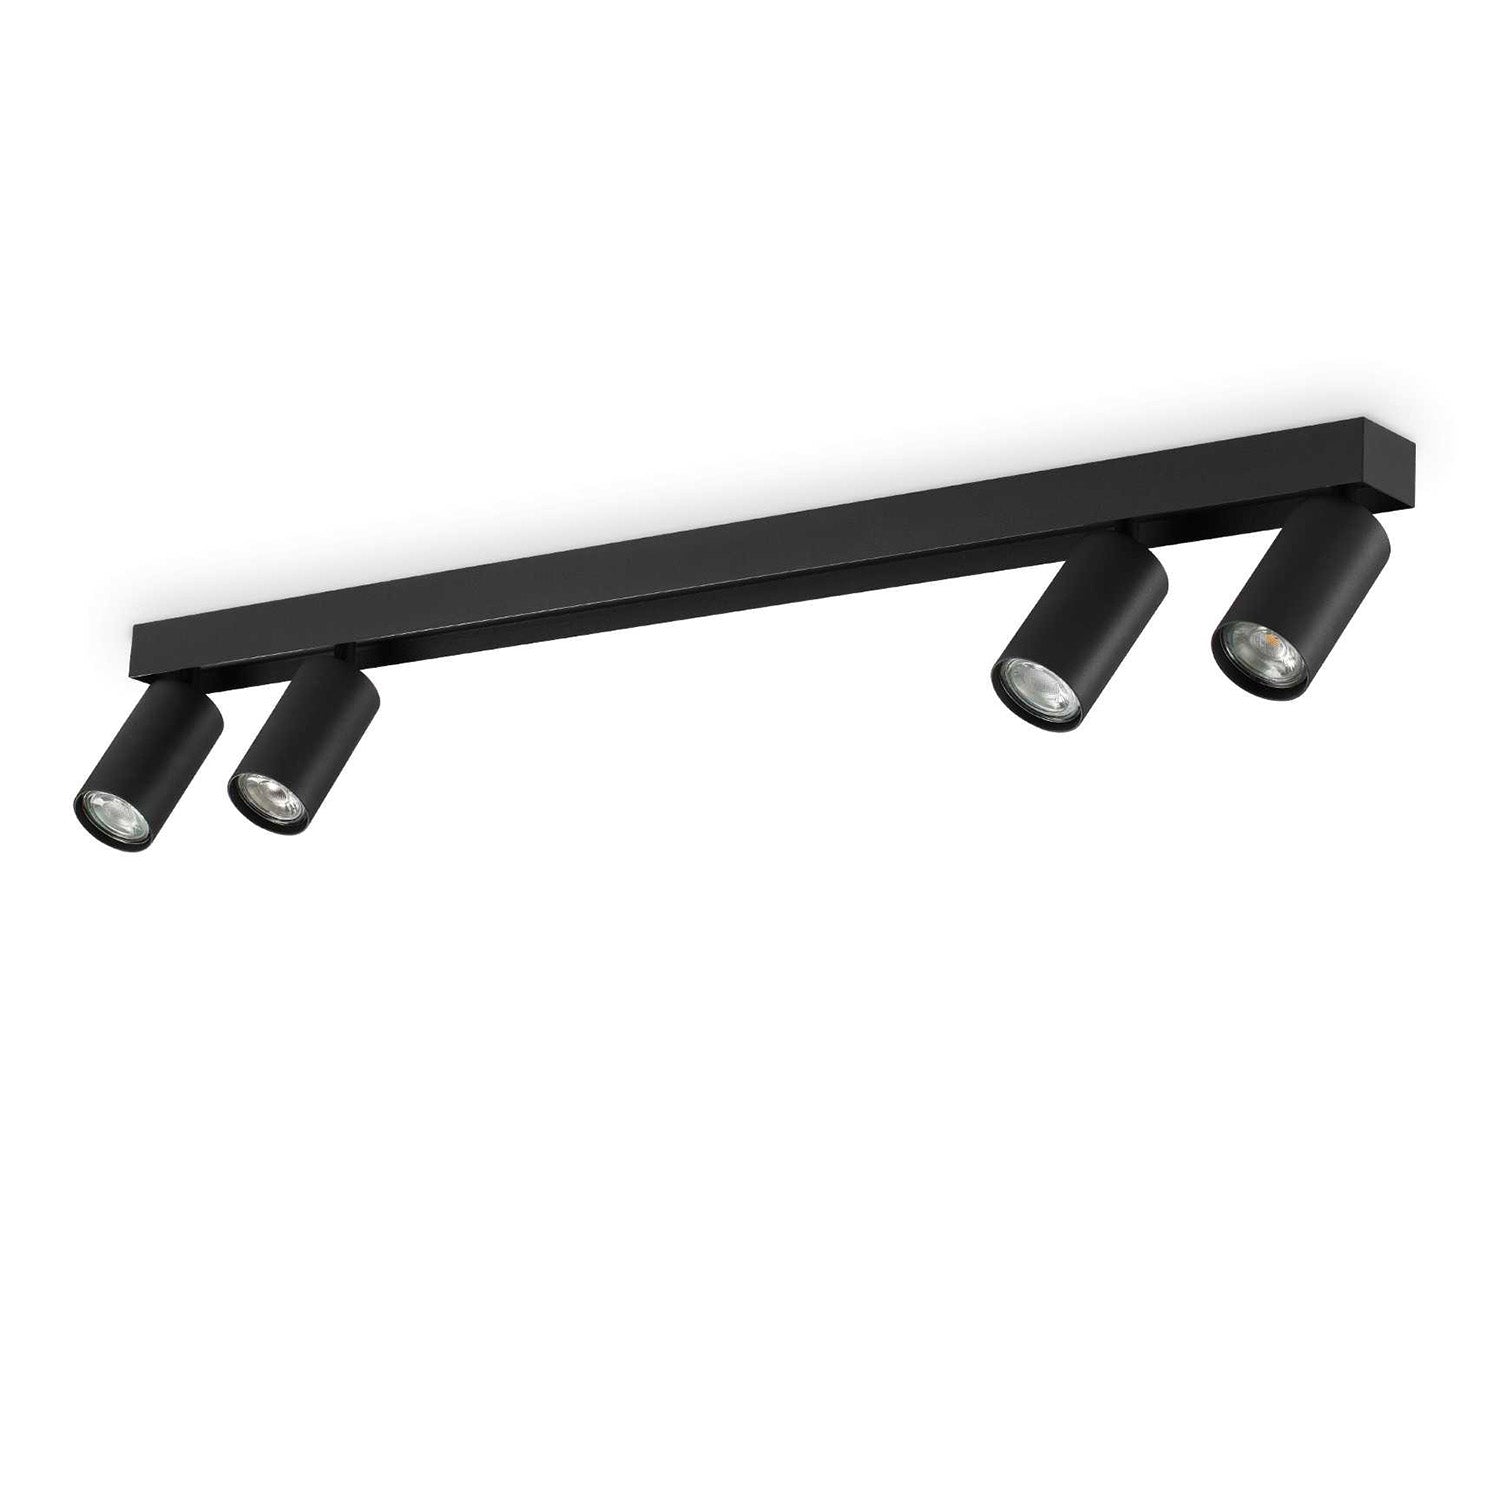 PROFILO - Large track ceiling light with adjustable spots